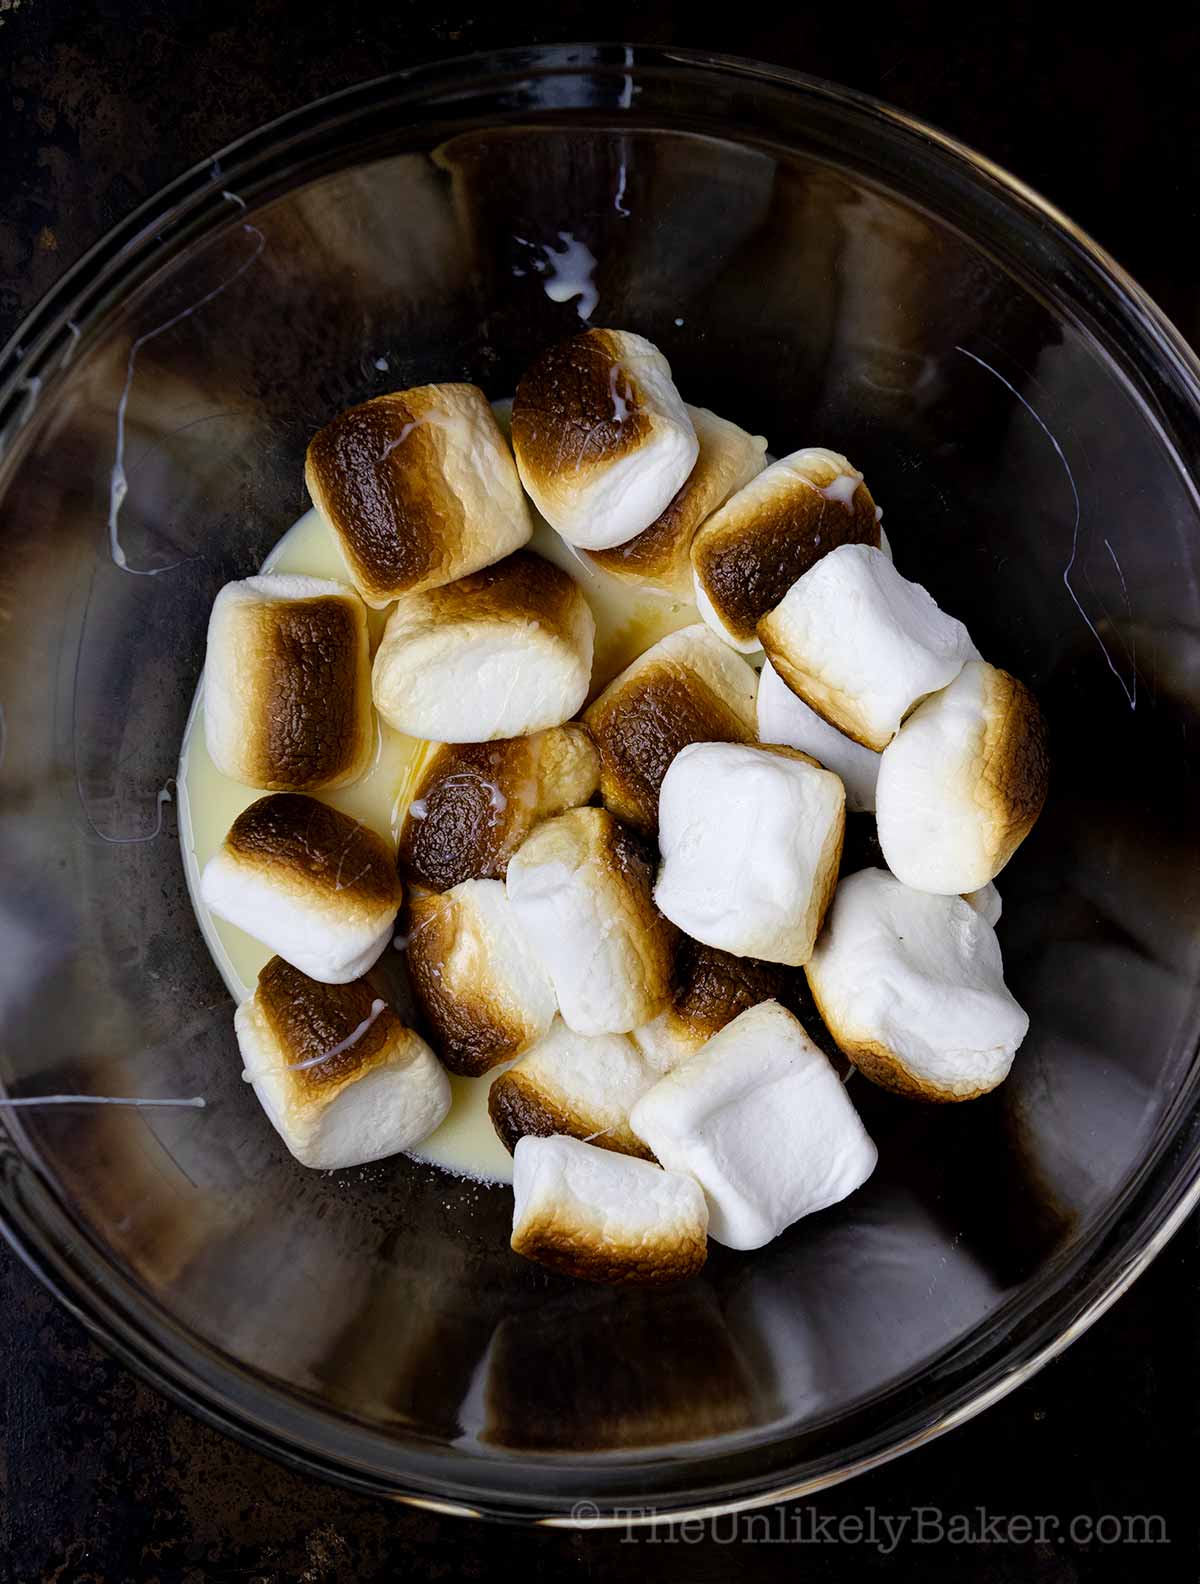 Charred marshmallows in a bowl.